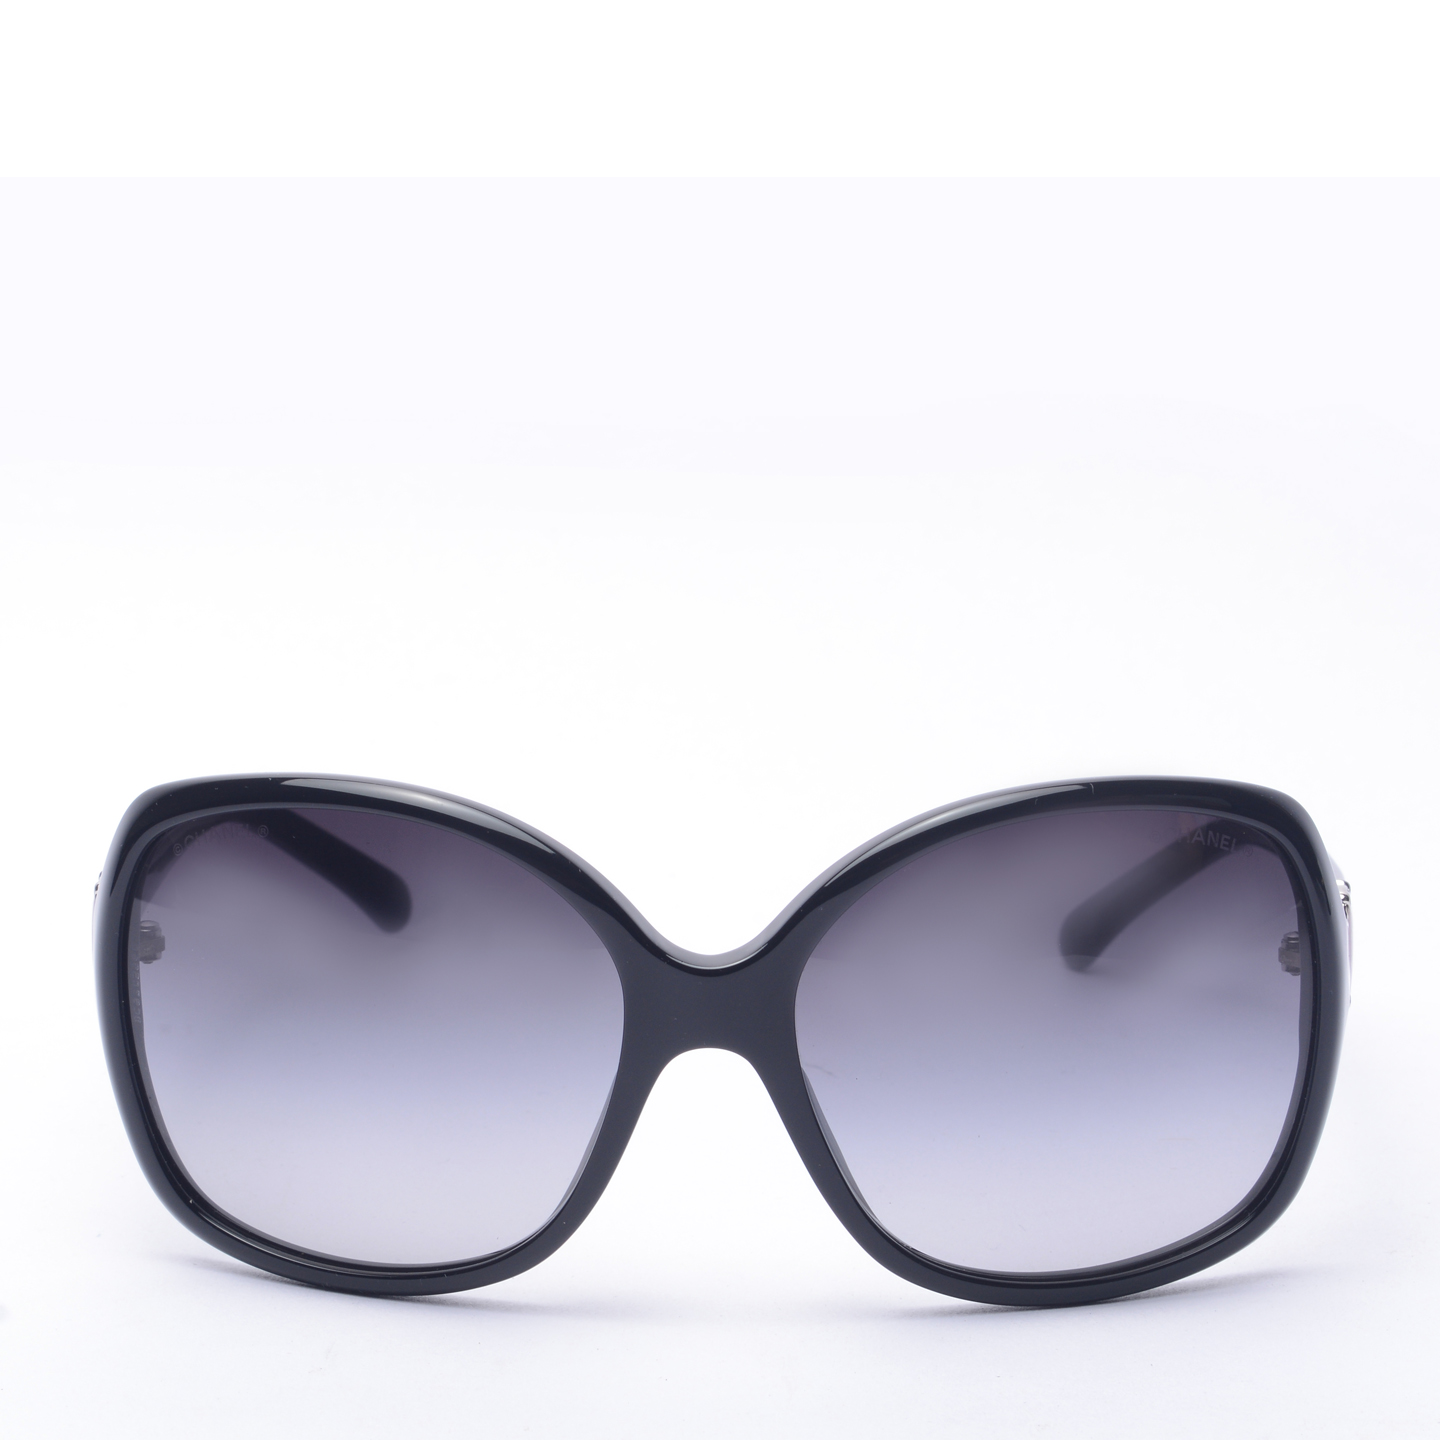 Chanel Black CC Over-sized Sunglasses 5174 - LabelCentric